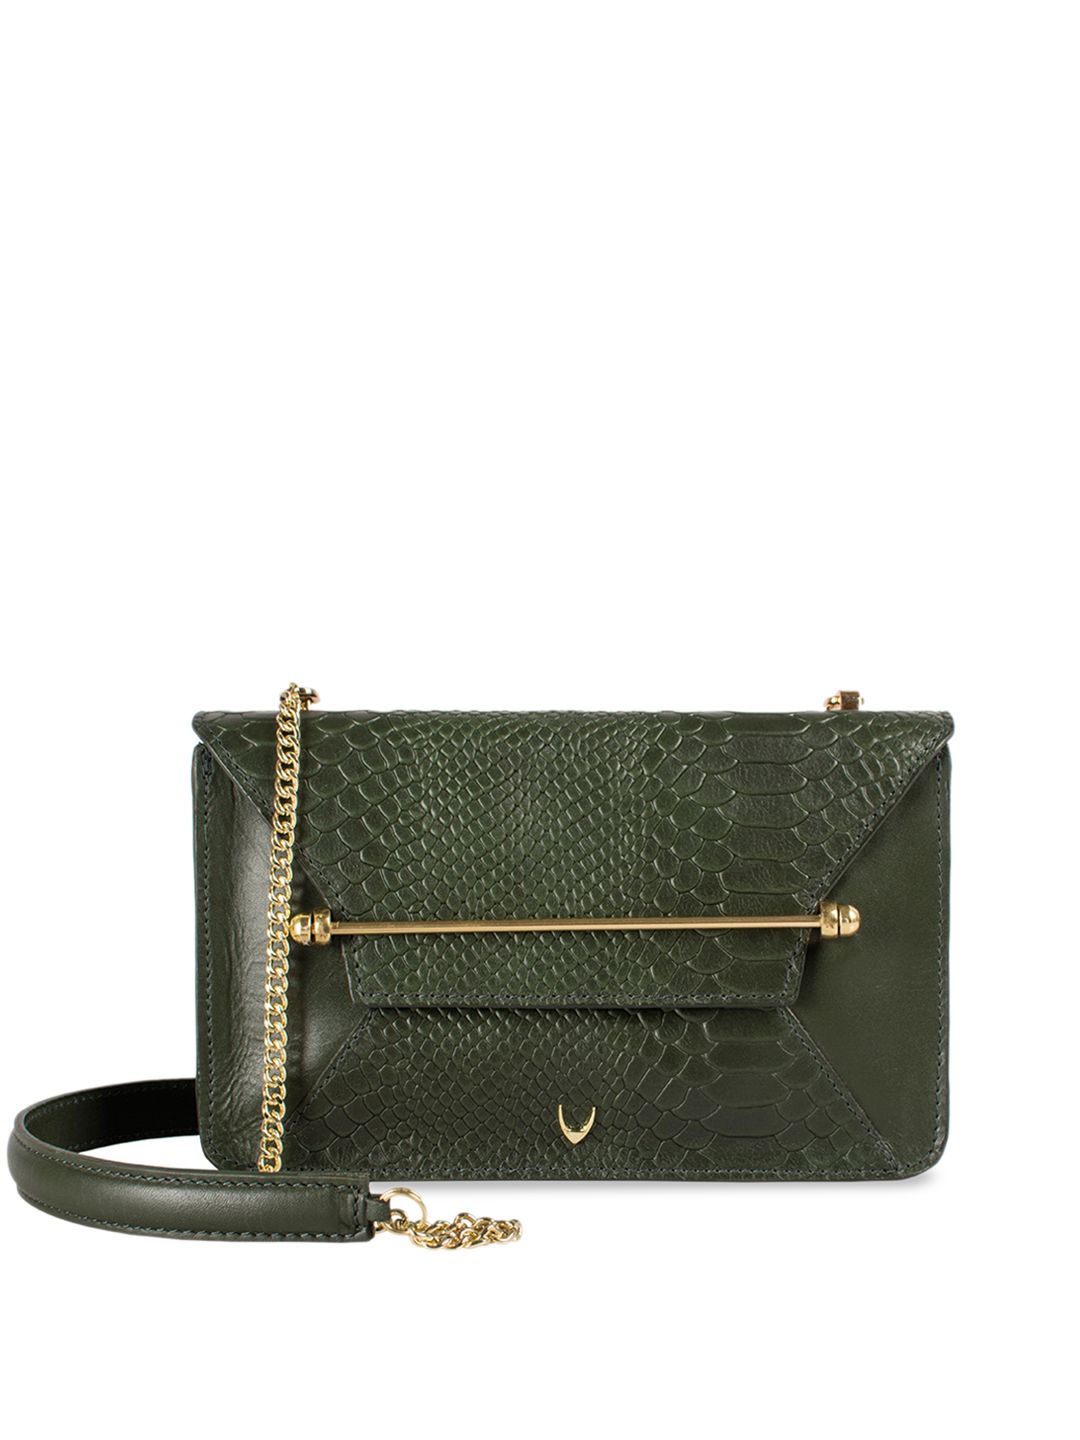 Hidesign Green Textured Leather Sling Bag Price in India